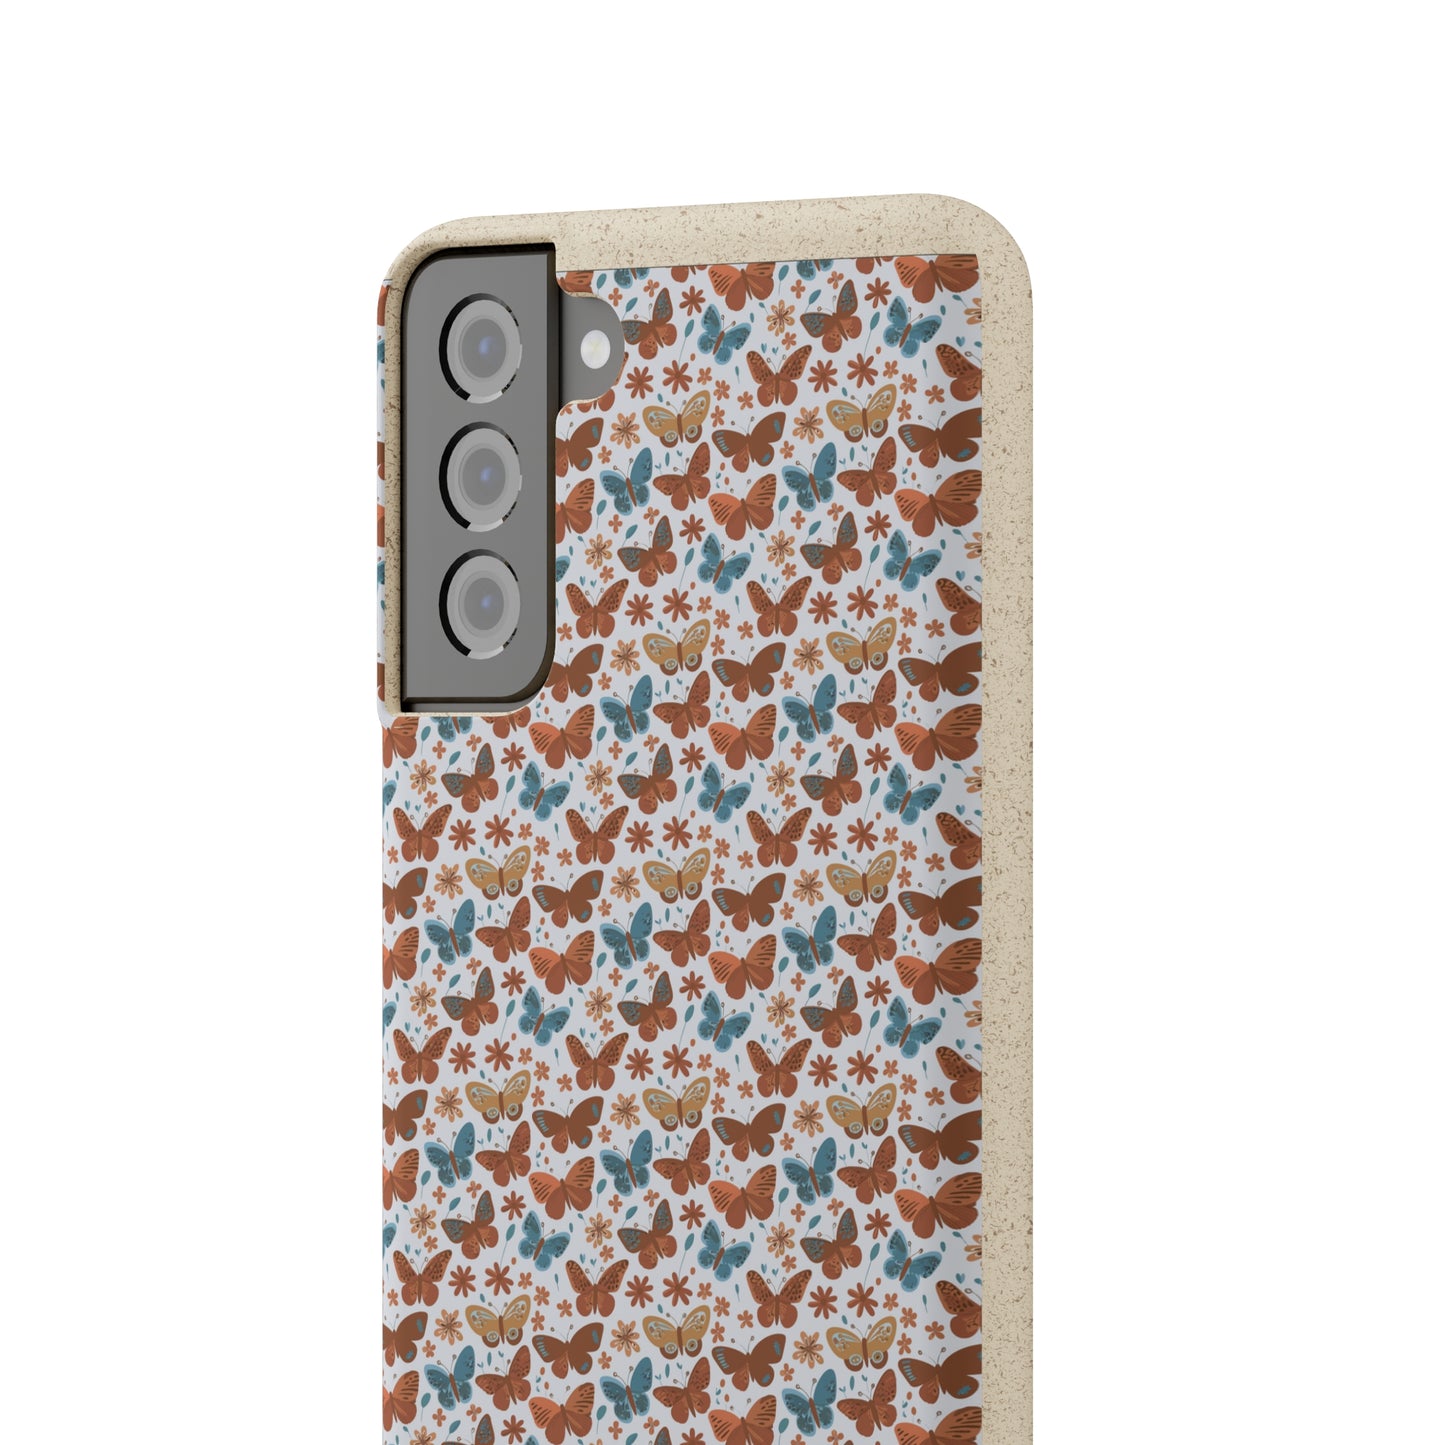 Biodegradable Phone Cases with Teal and Brown Butterflies: A Beautiful and Eco-Friendly Way to Protect Your Phone and the Planet